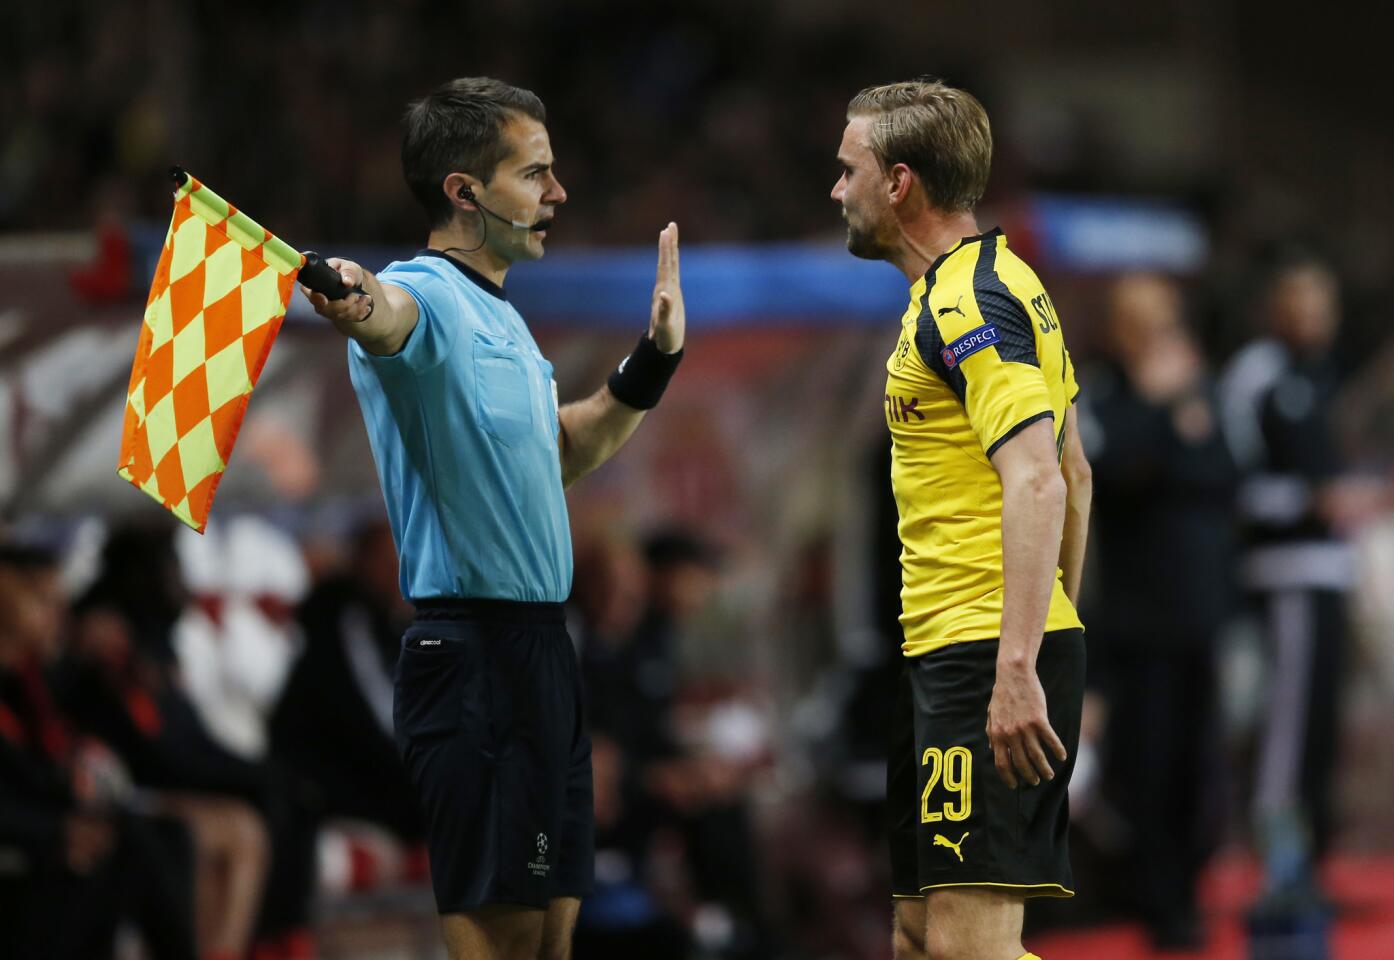 Borussia Dortmund's Marcel Schmelzer remonstrates with the assistant referee